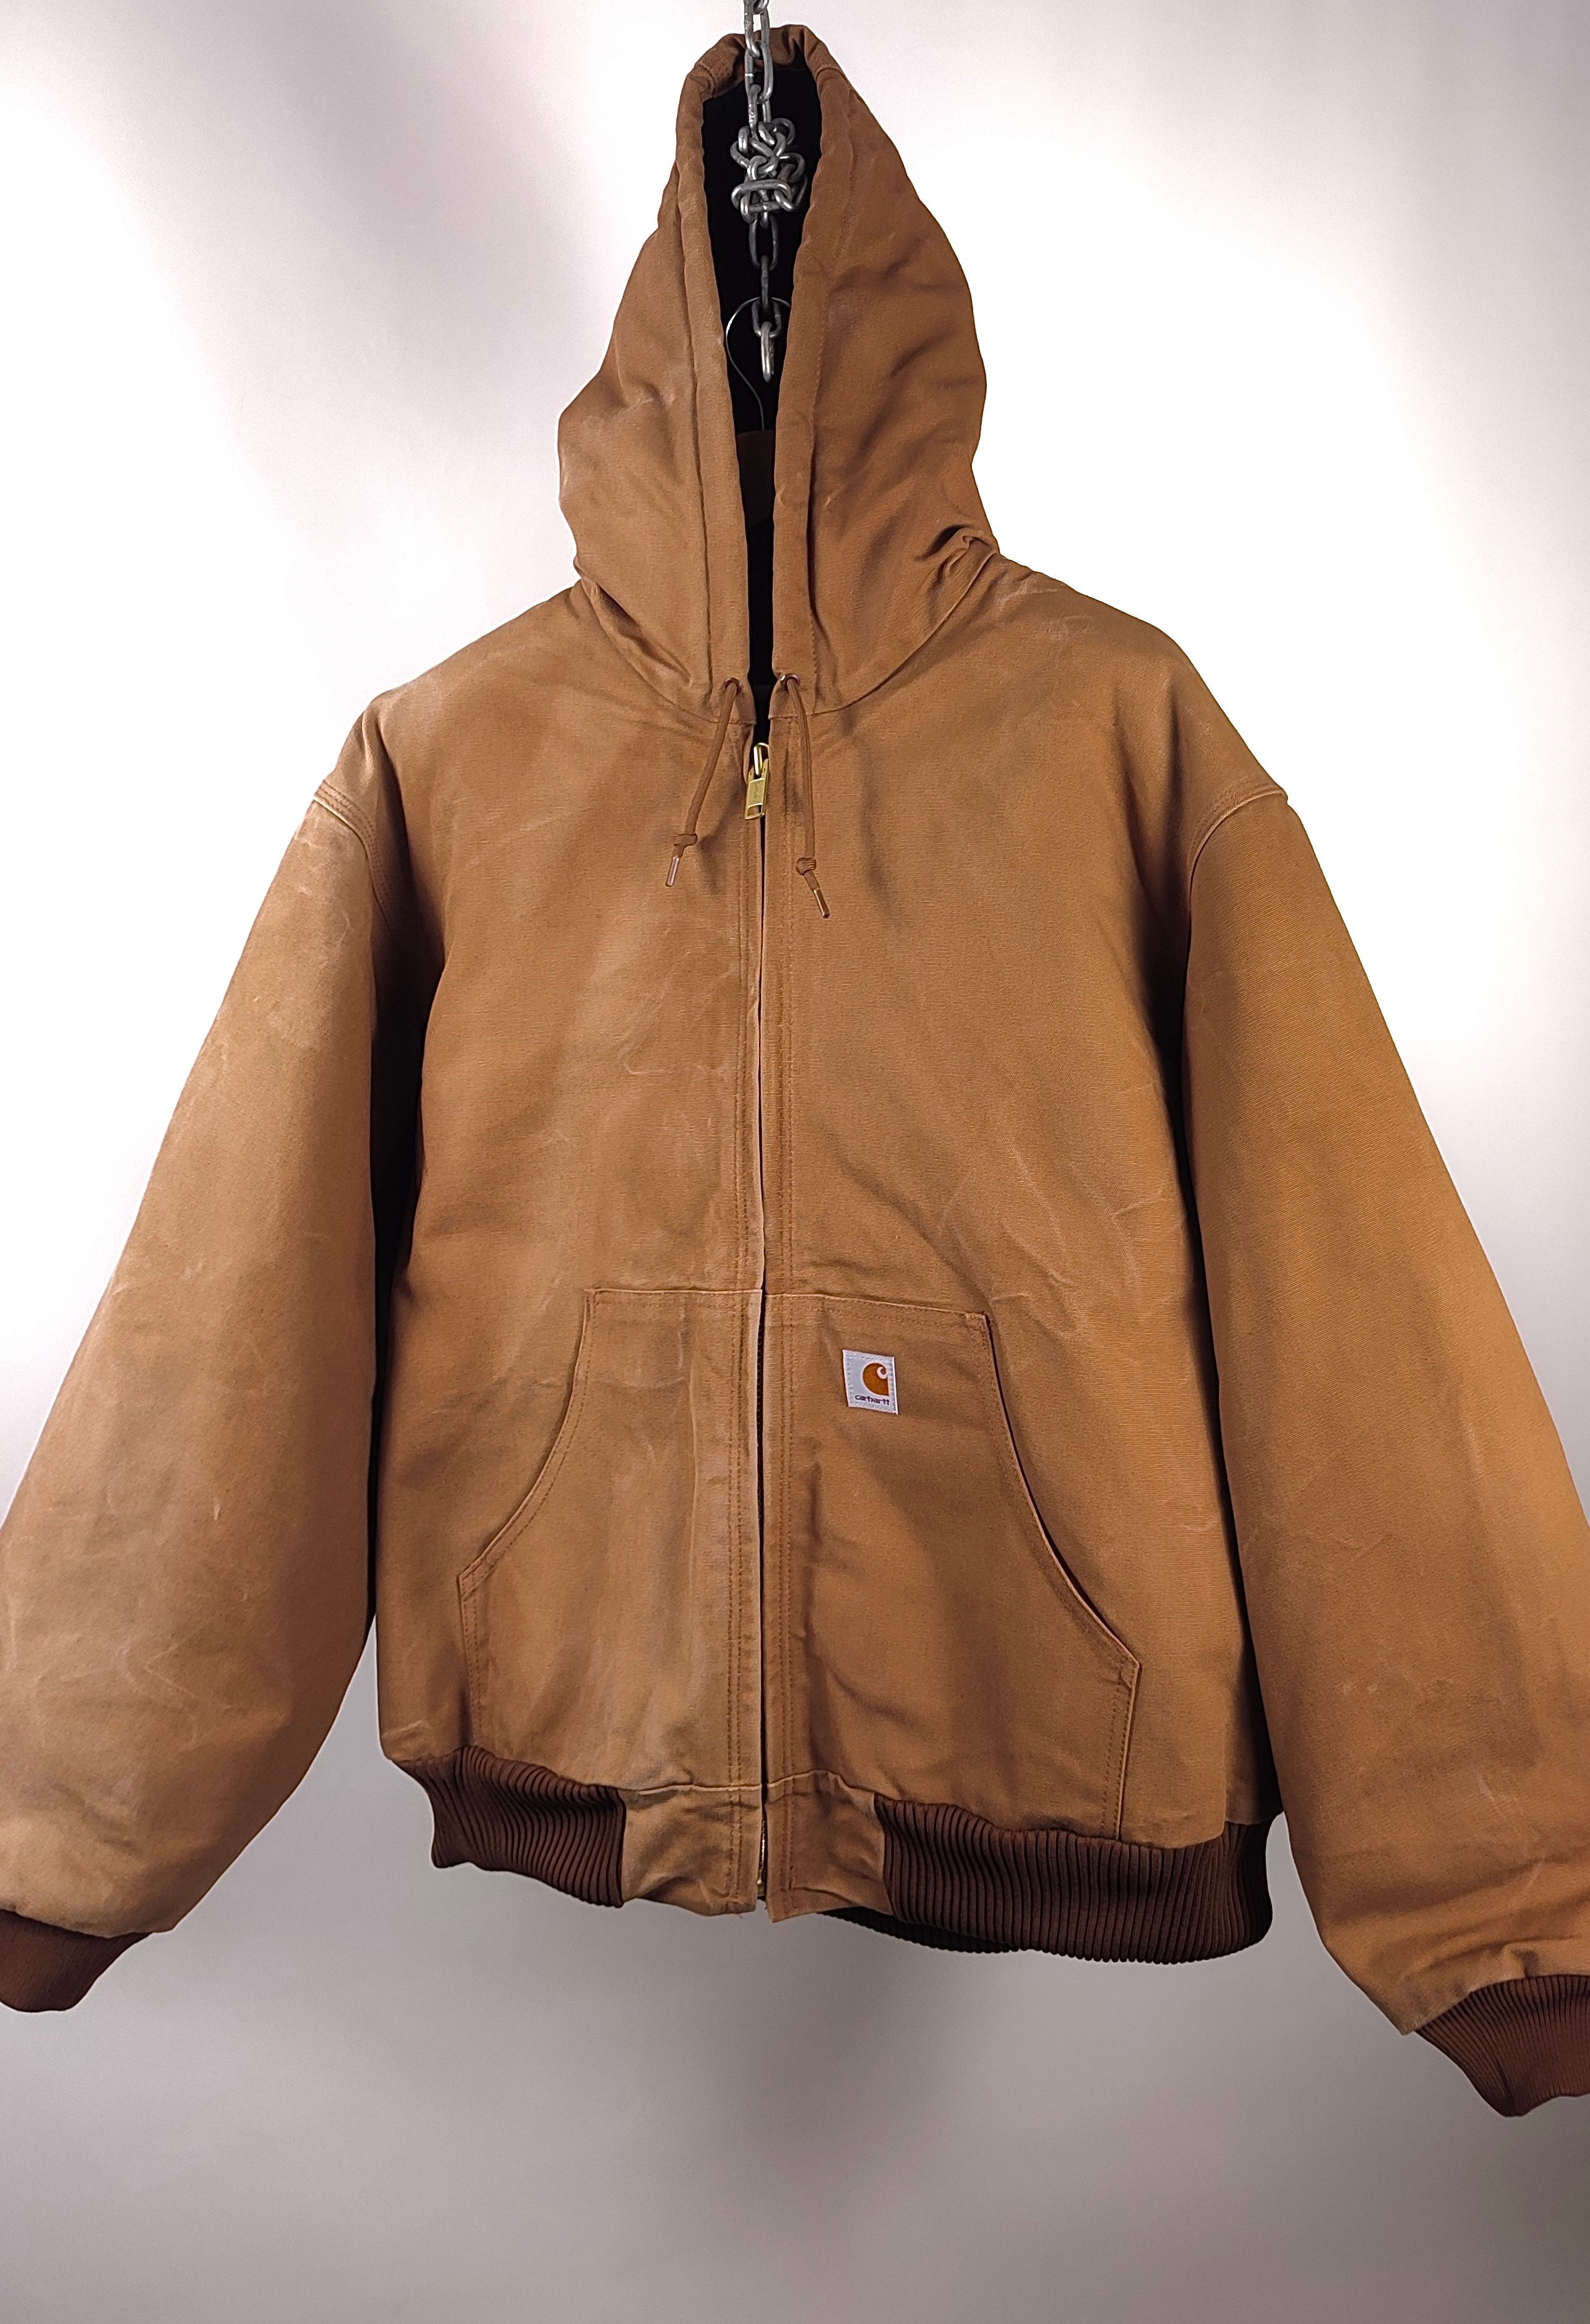 Pre-owned Carhartt X Vintage 90's Vintage Carhartt Usa Active Faded Brown Workwear Jacket